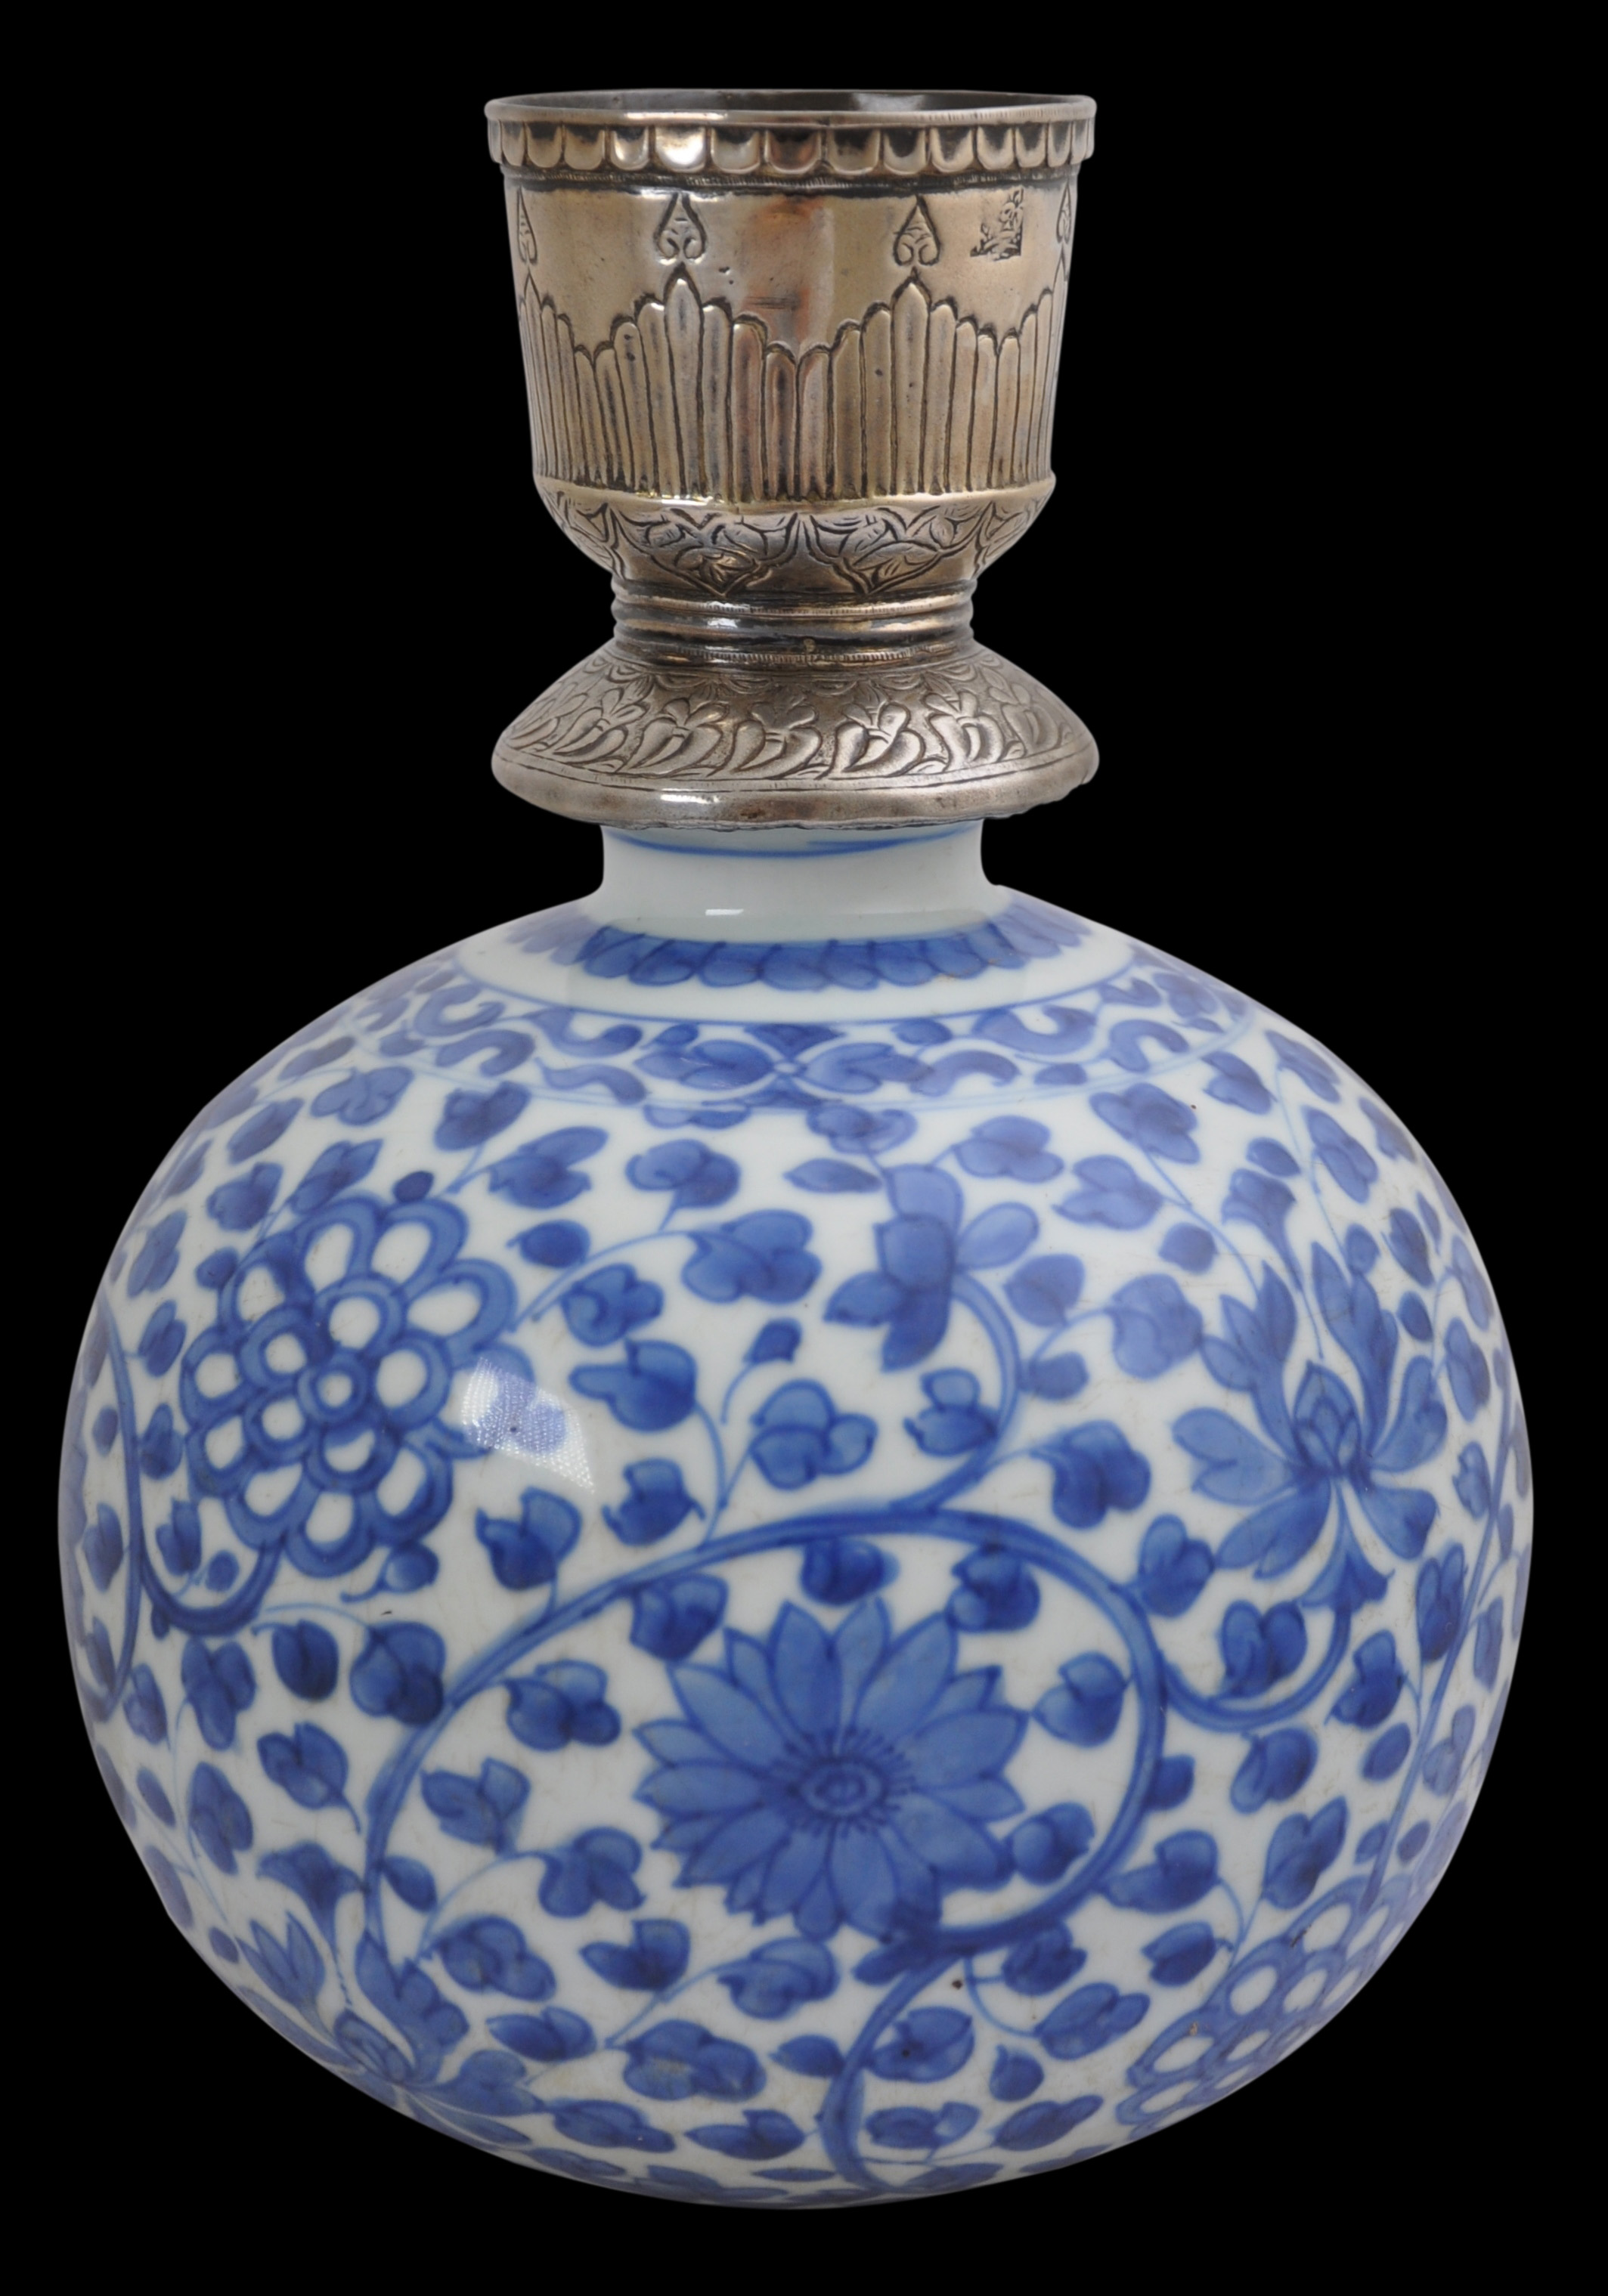 Kangxi (康熙) Blue & White Hookah Base with Chased Silver Mounts